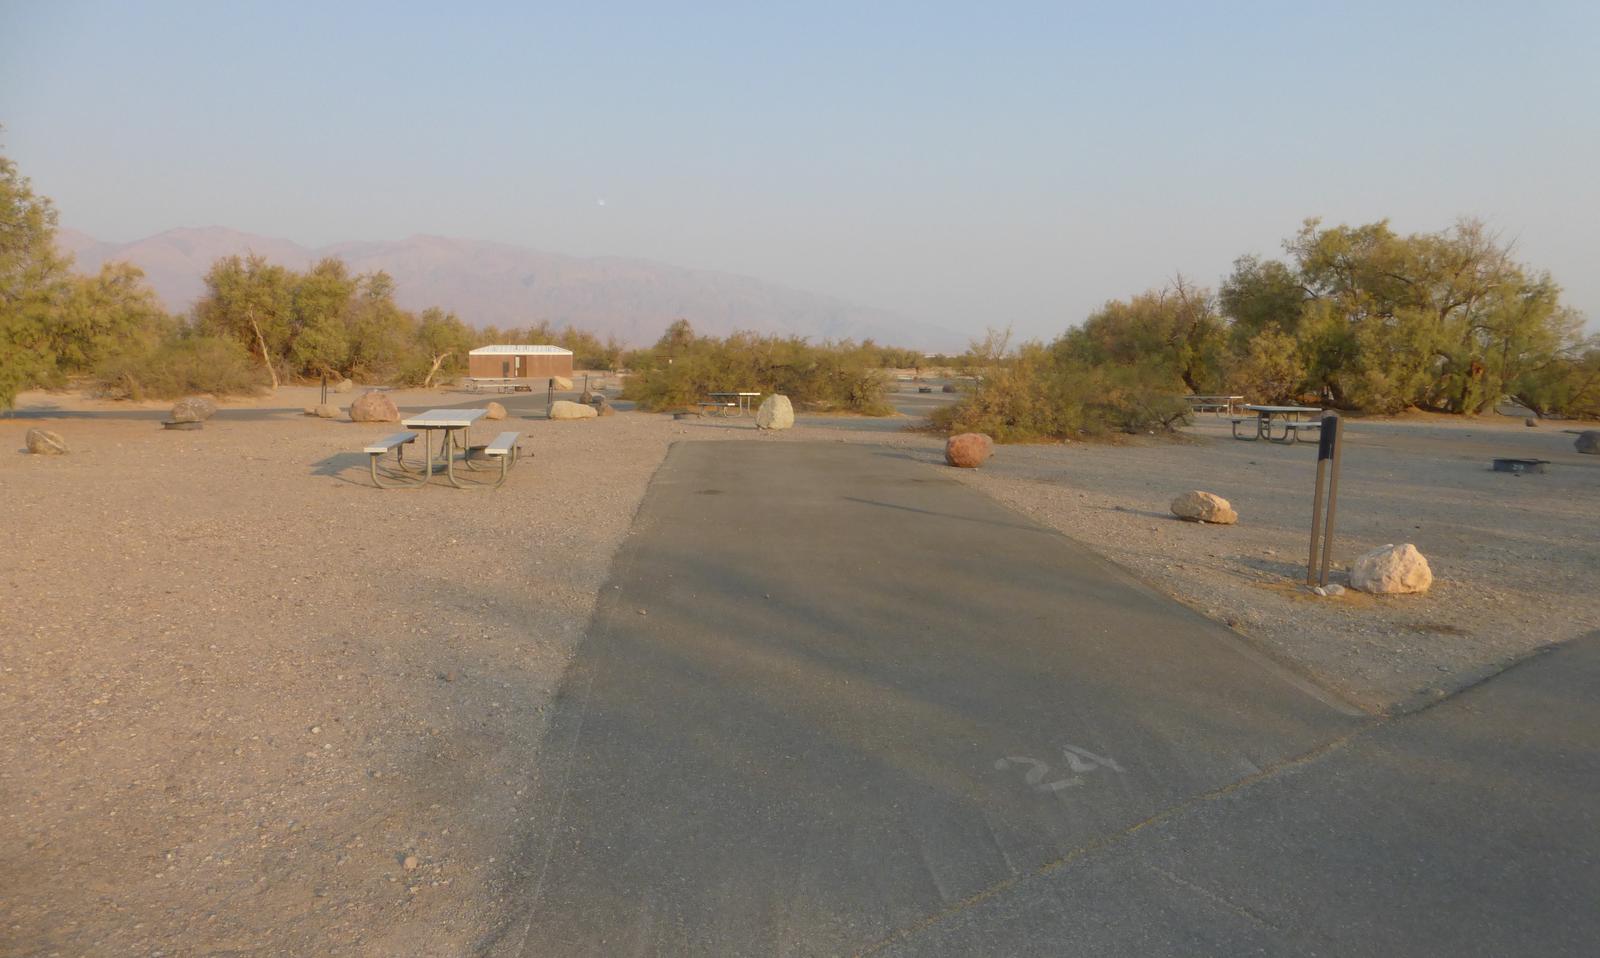 Furnace Creek Campground standard nonelectric site #24 with picnic table and fire ring.